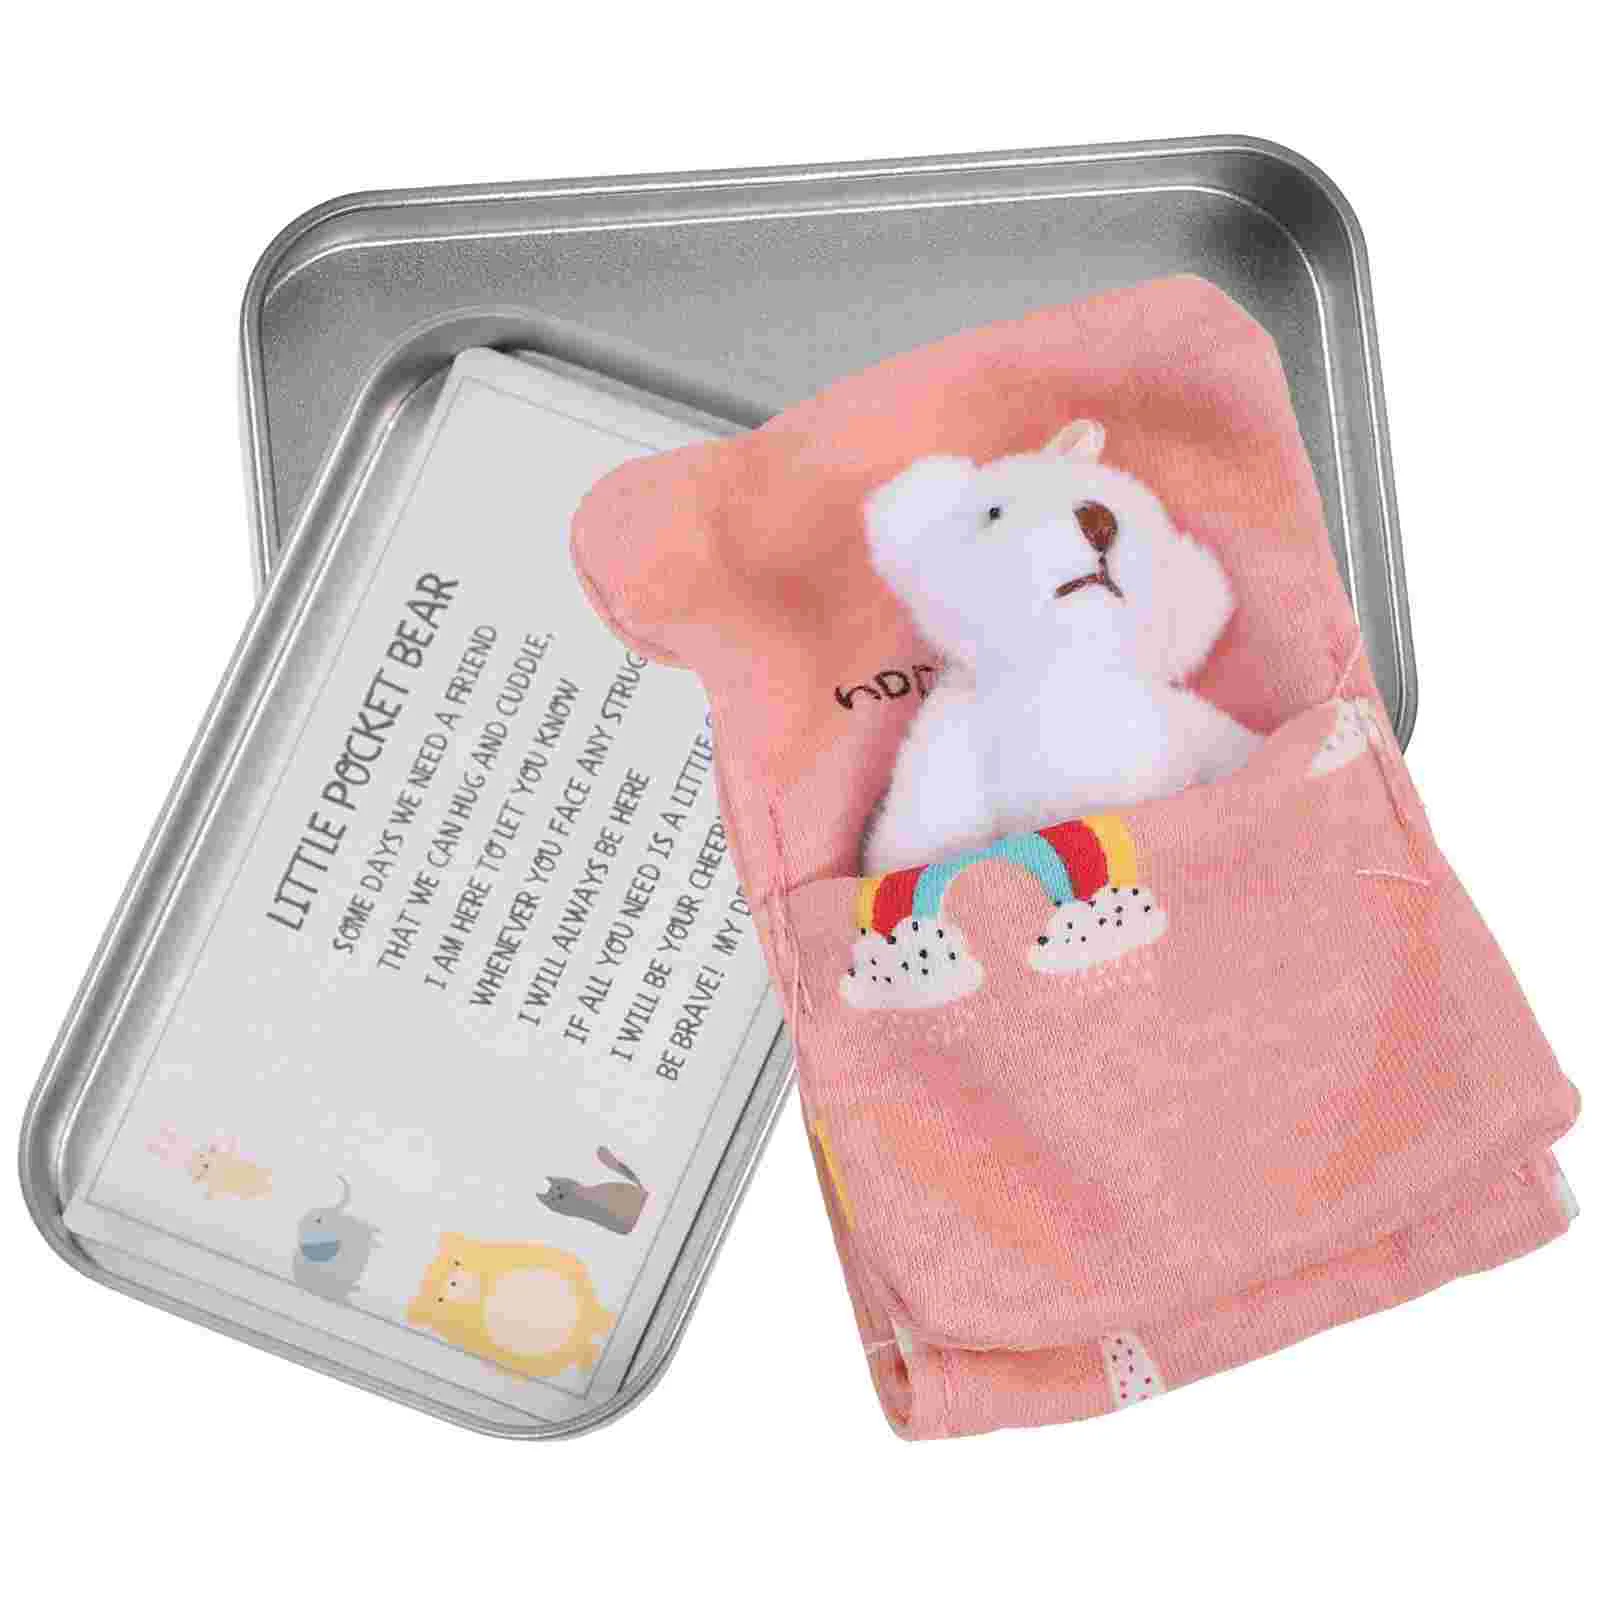 unique bear shaped wax mould 3d silicone mold cake soap casting molds molds ornament gifts for diy enthusiast Plush Mini Bear Kids Room Decor Stuffed Animal Decoration Ornament Figurine Tin Pink Gifts